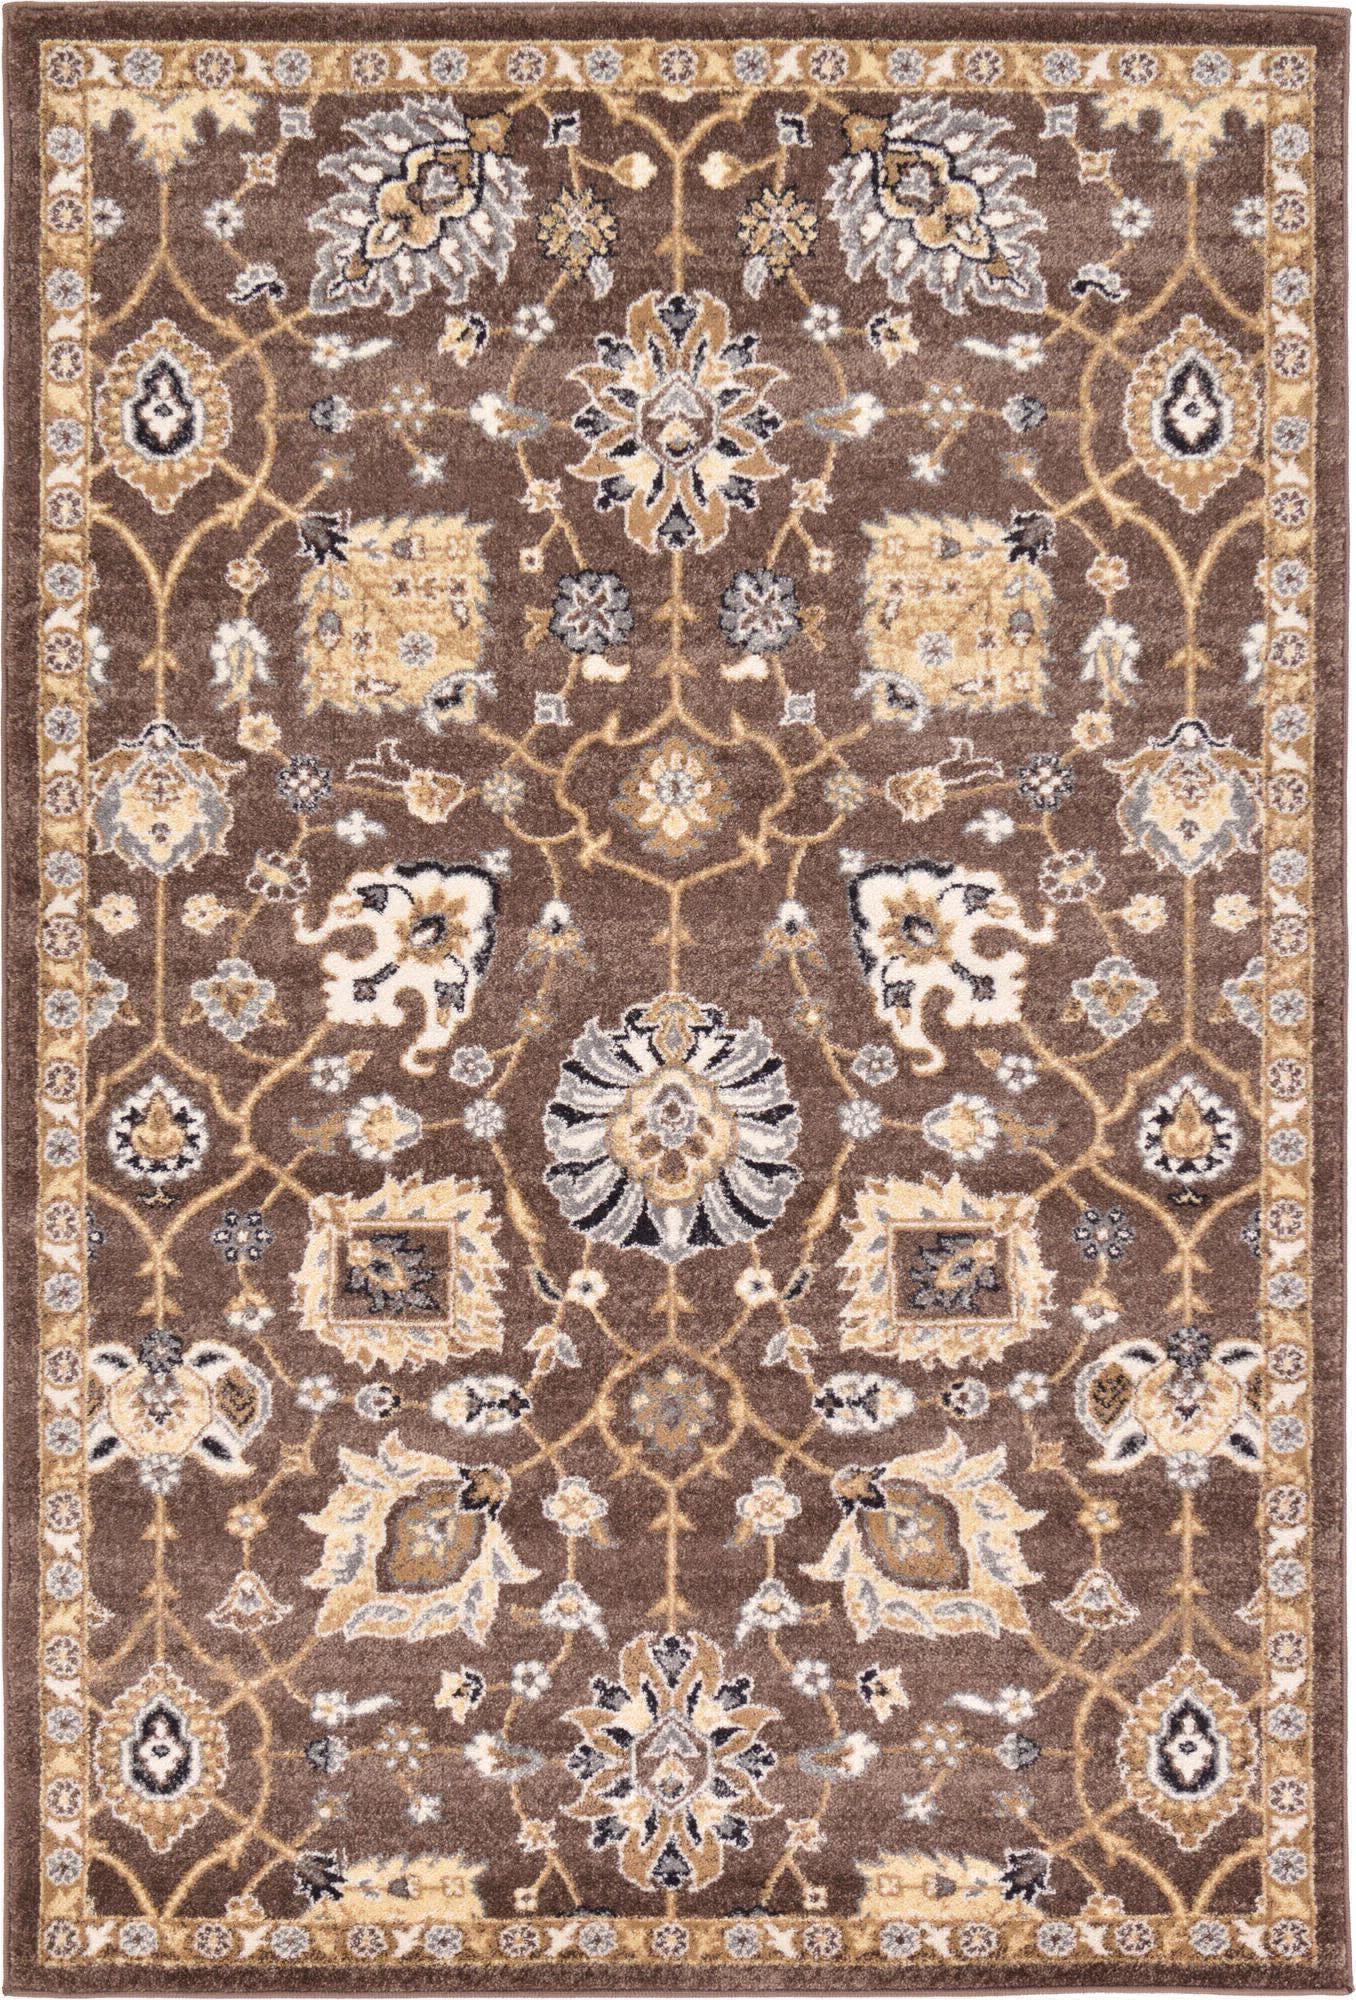 Unique Loom Tradition T-Heritage-5205a Brown Area Rug main image